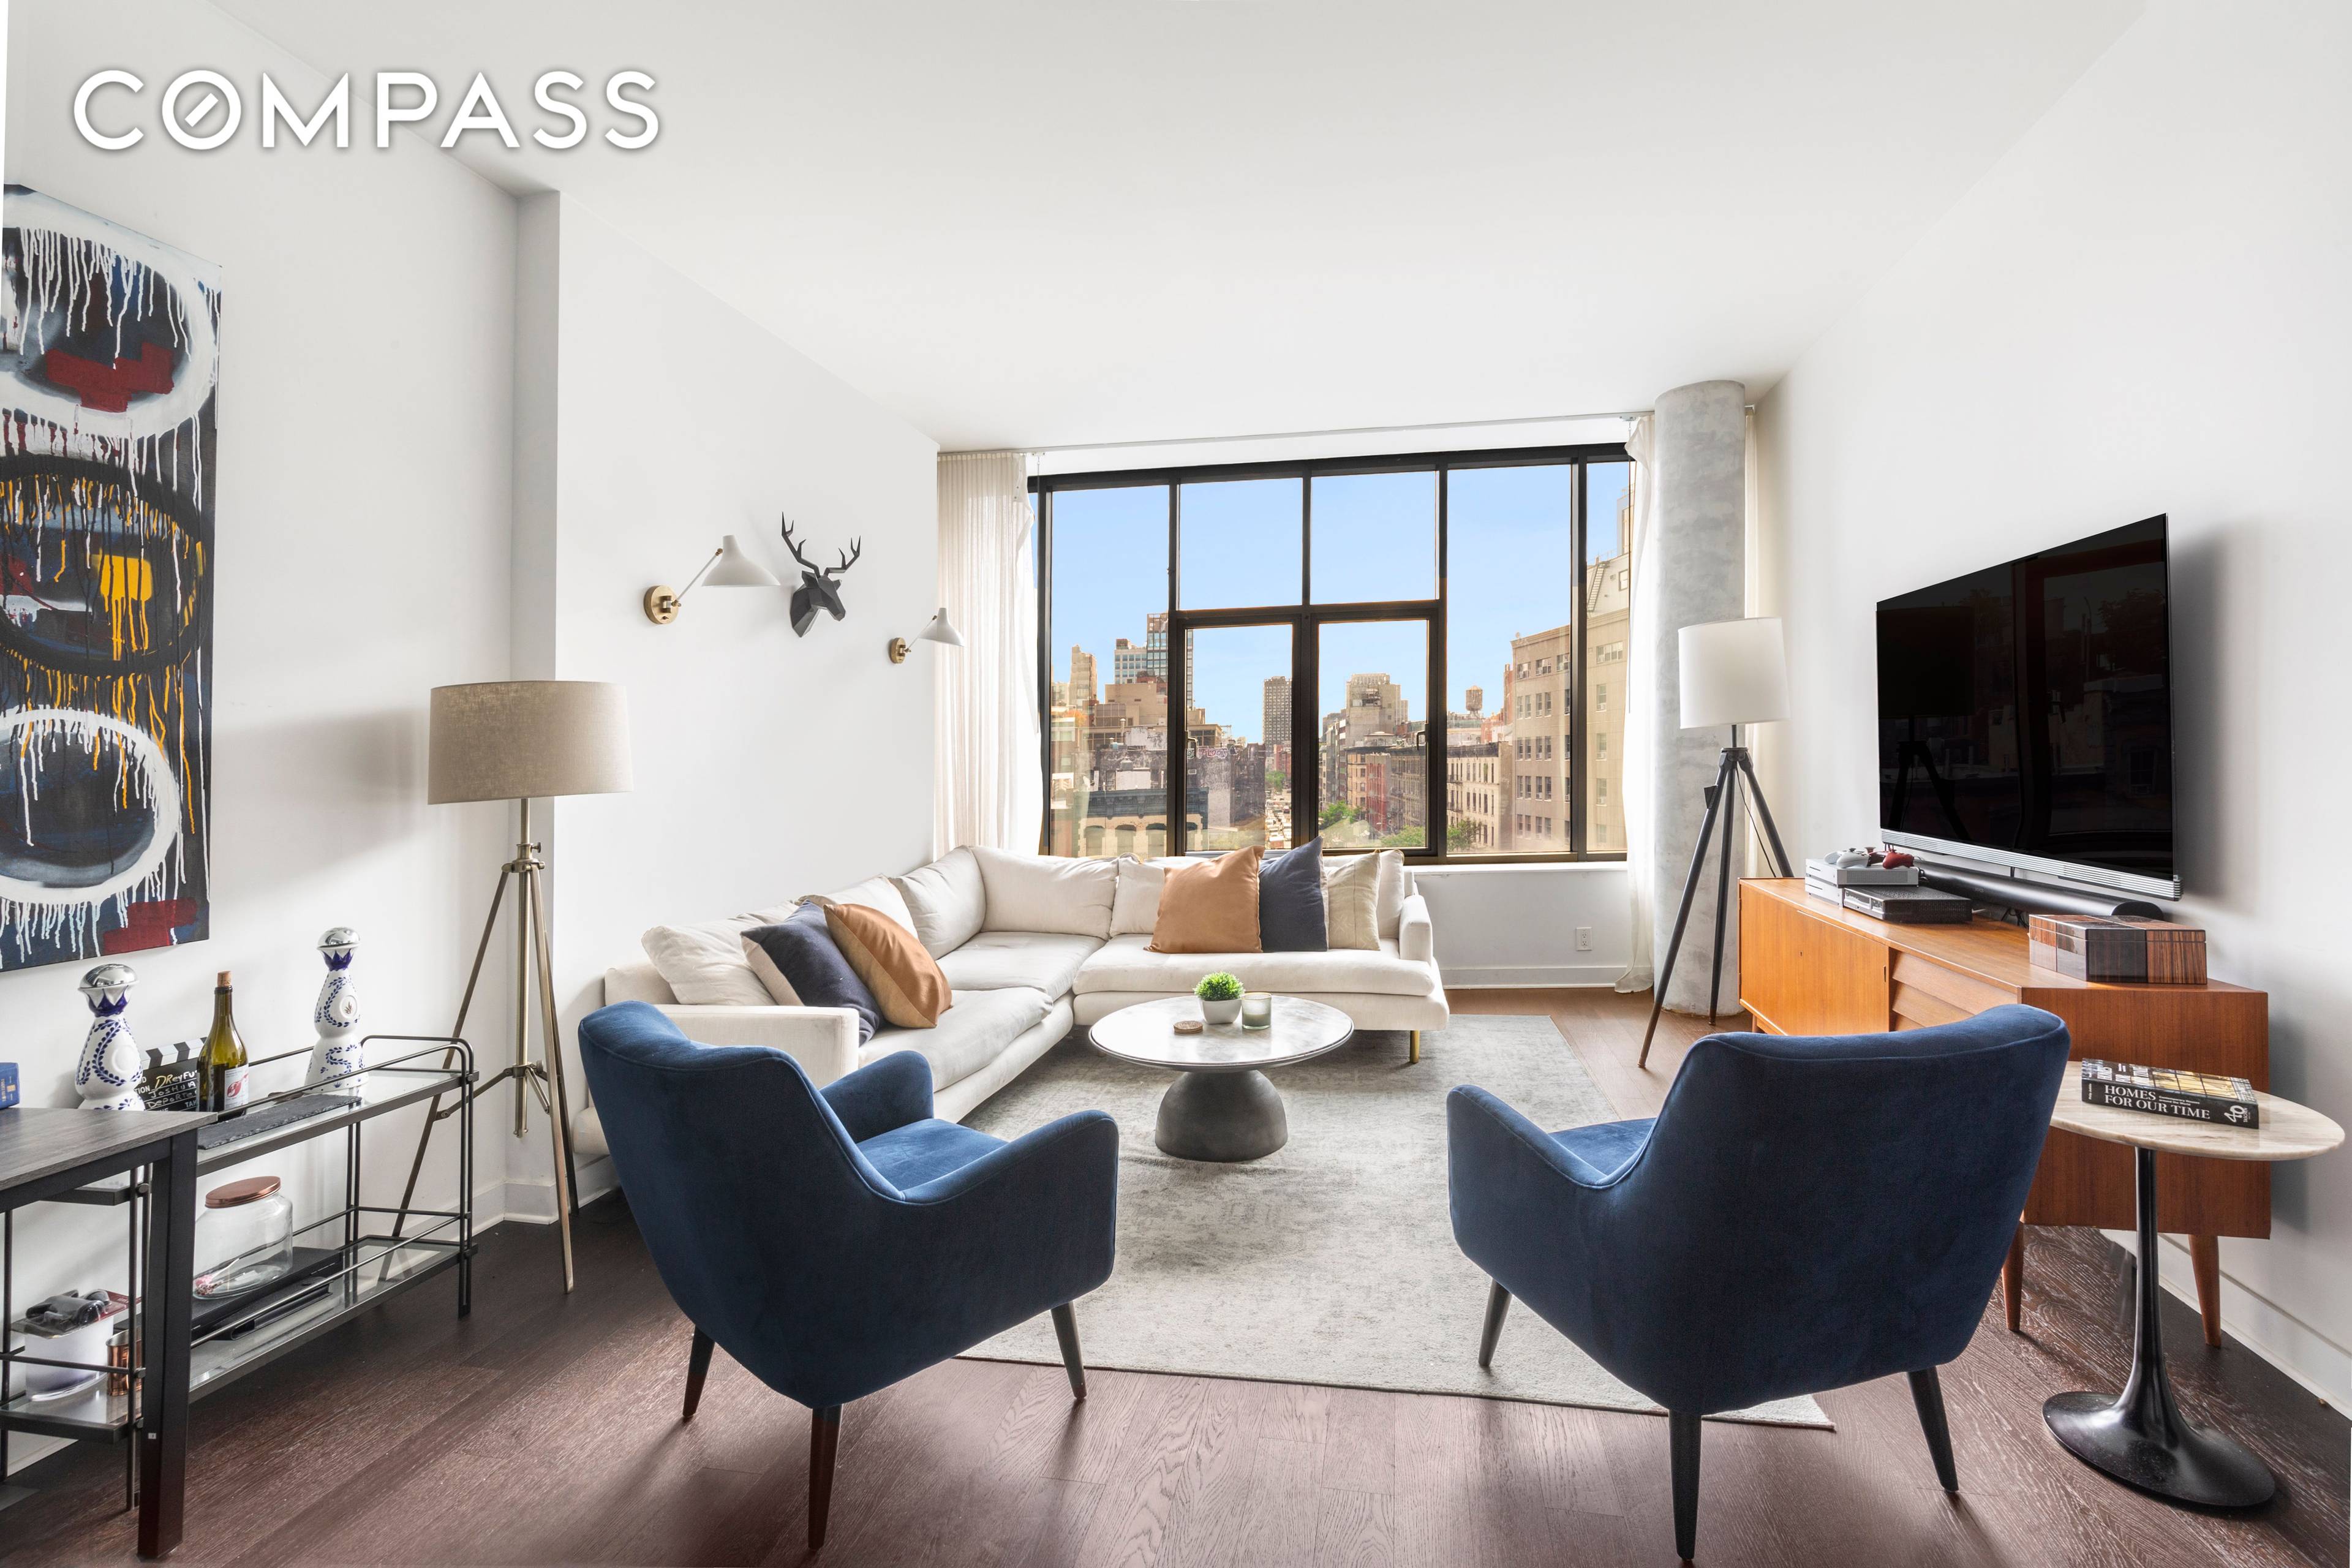 Located at the intersection of NYC s SoHo and NoLiTa, this two bedroom, two bathroom condo is the epitome of elevated loft living.